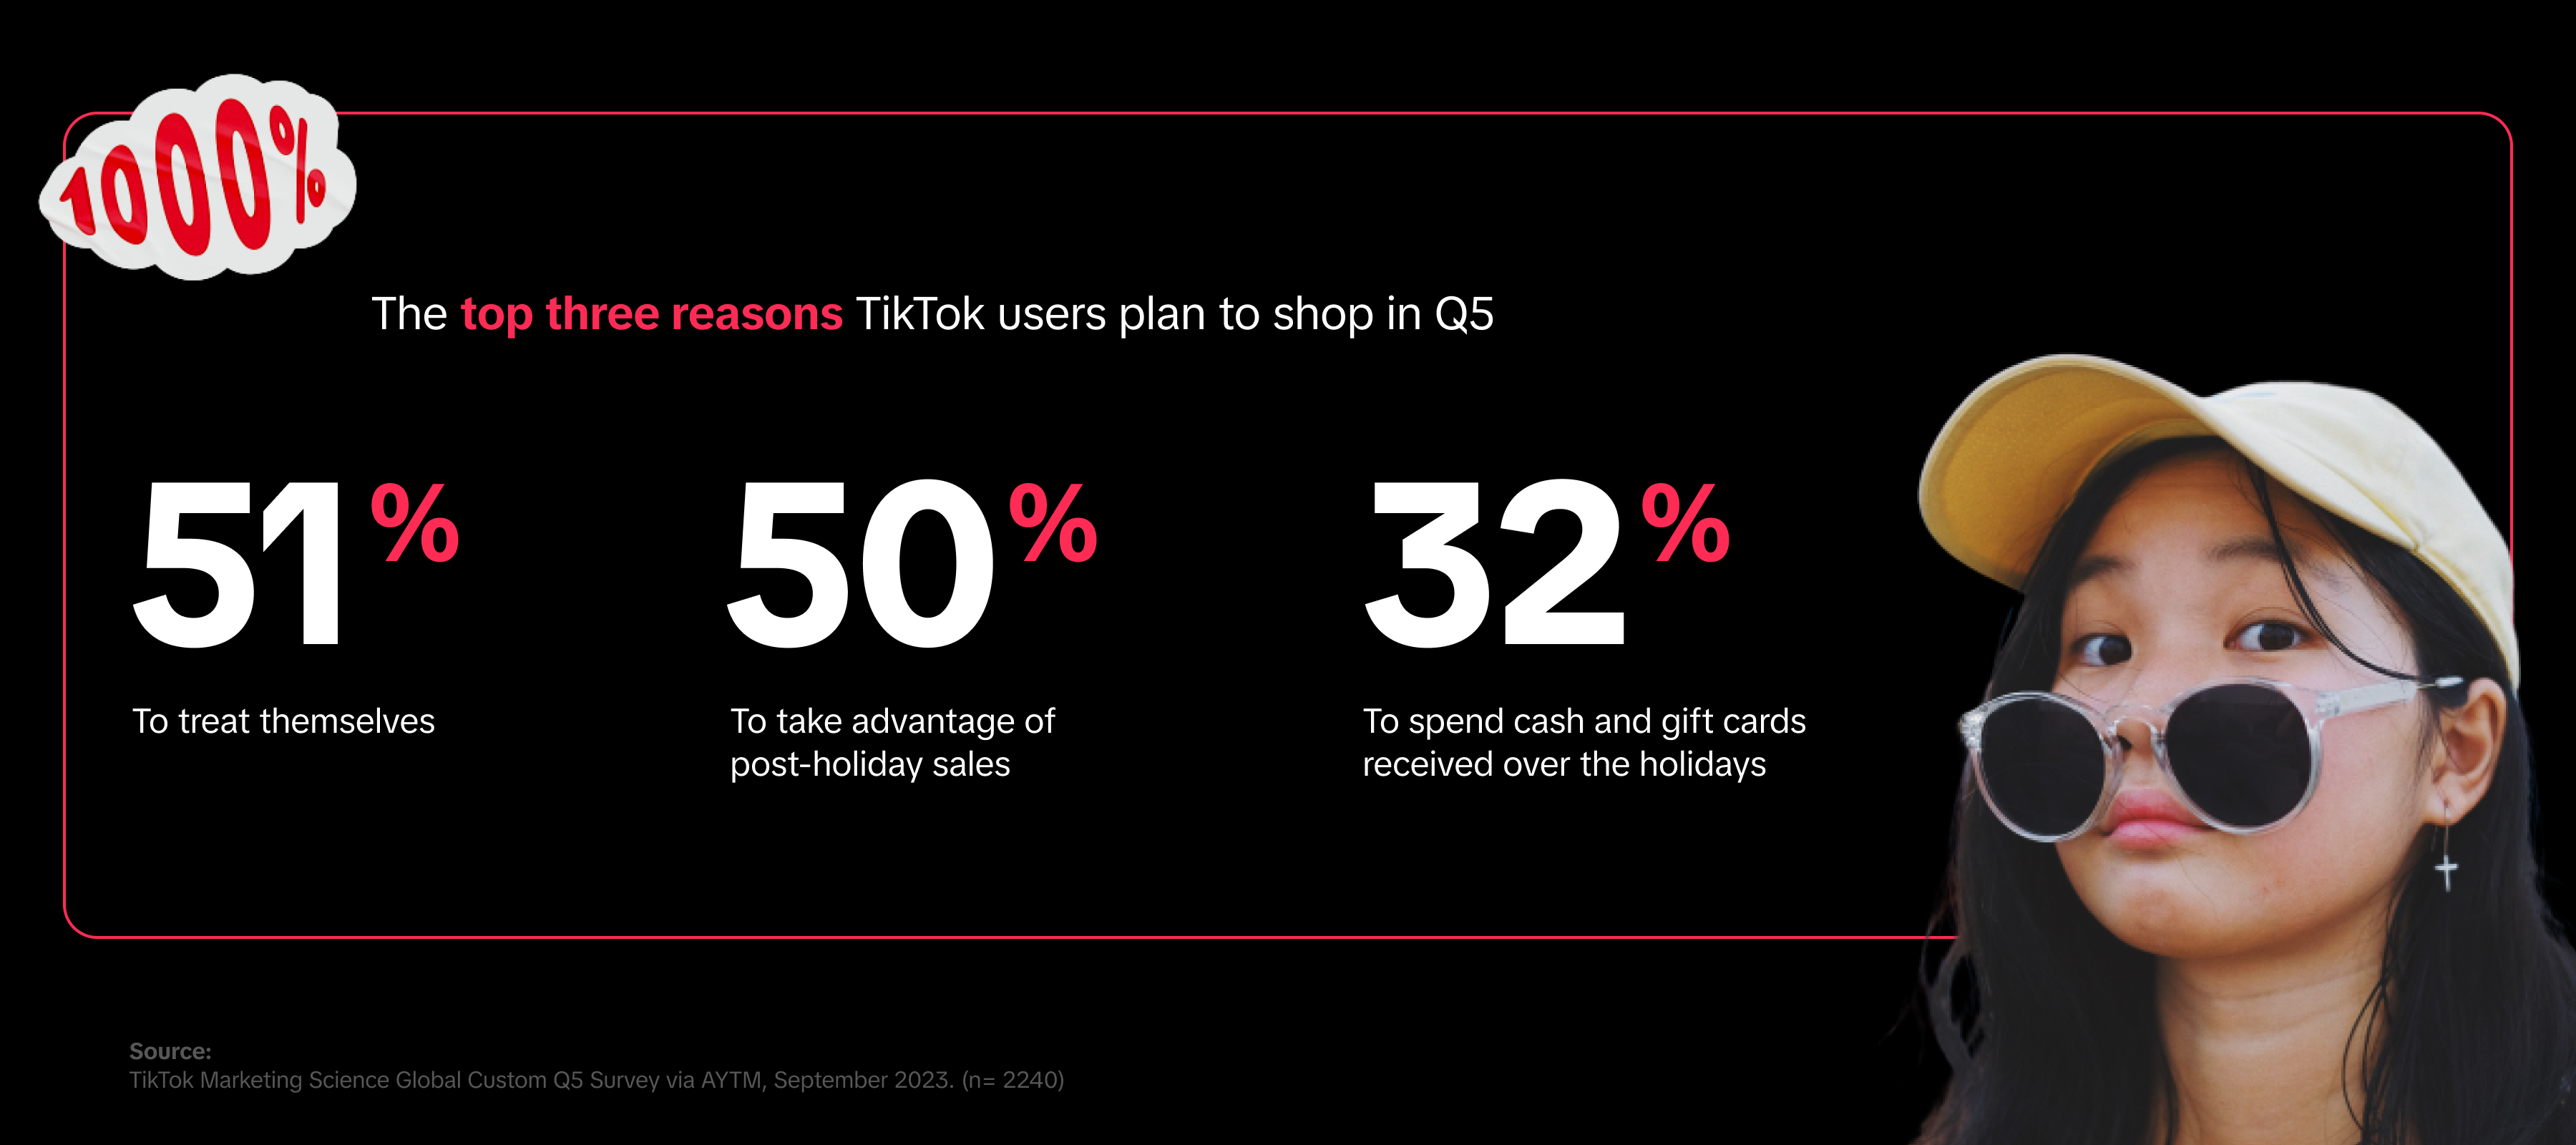 Top 3 reasons TikTok users plan to shop in Q5